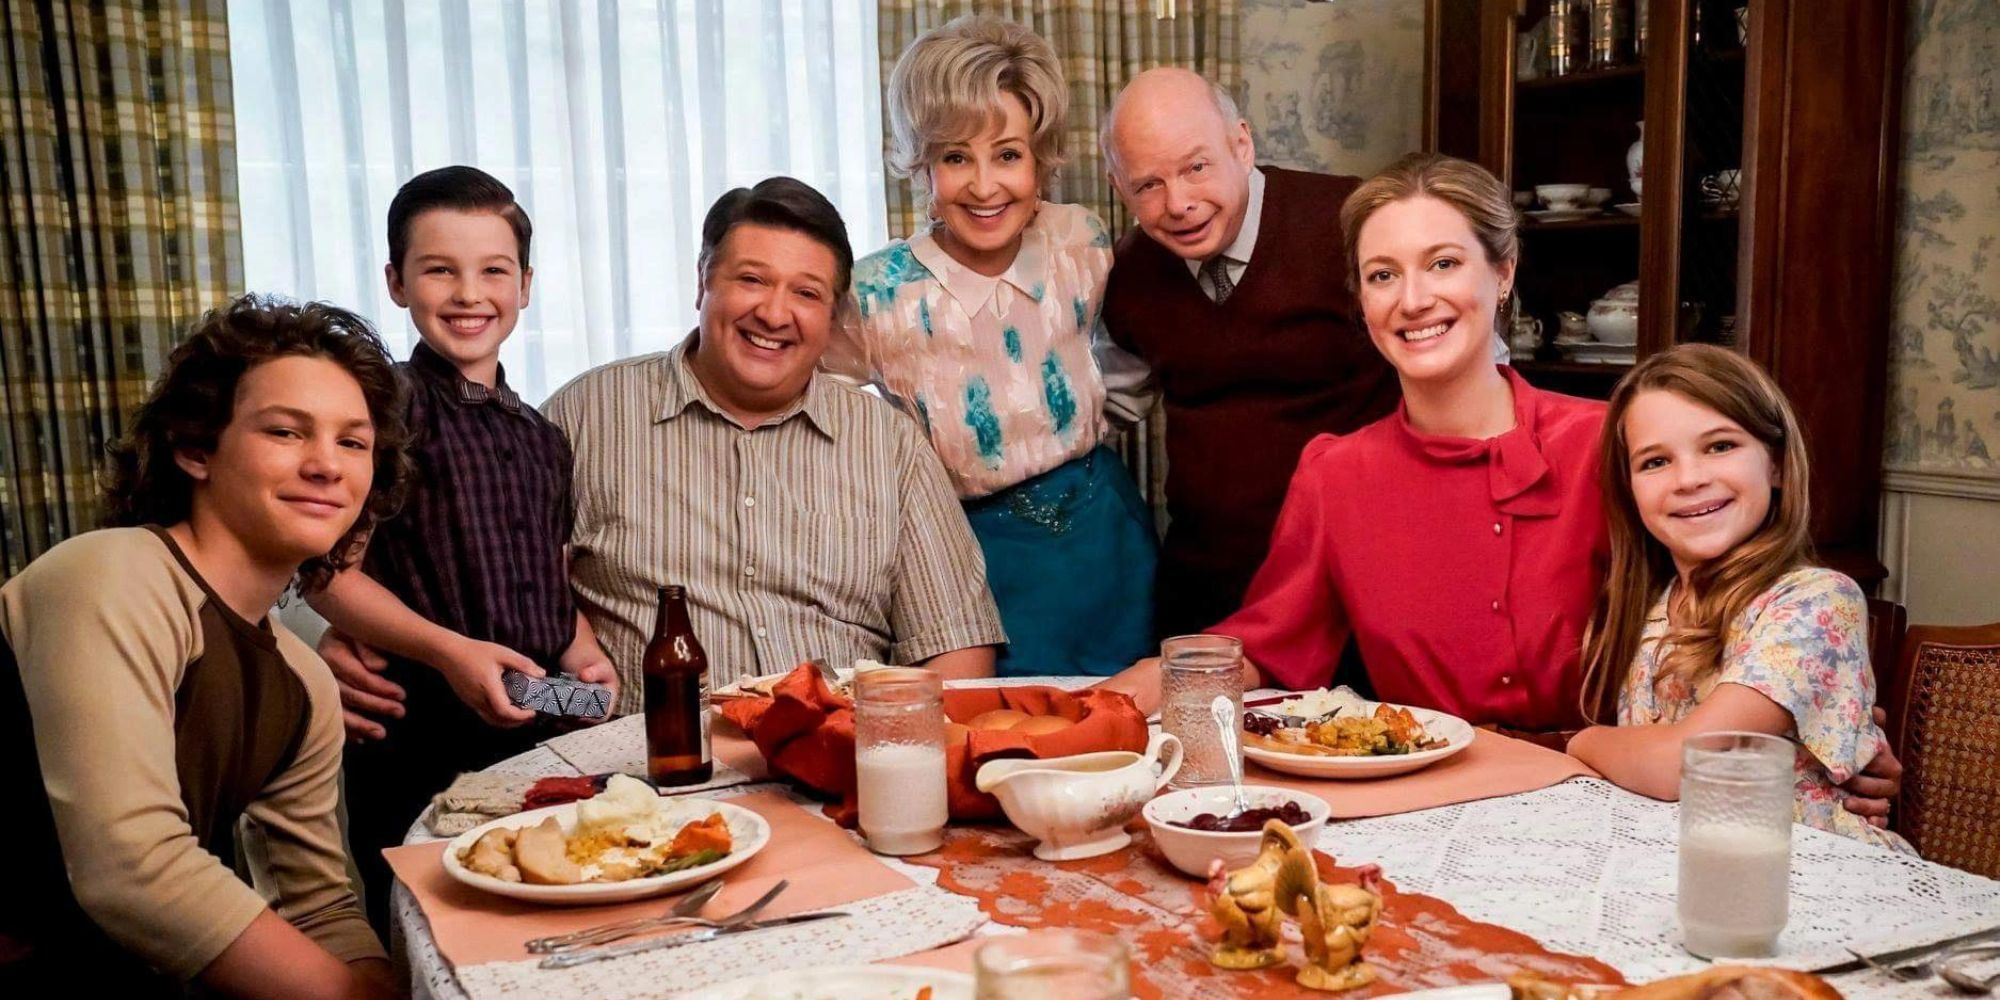 The cast of Young Sheldon eating dinner